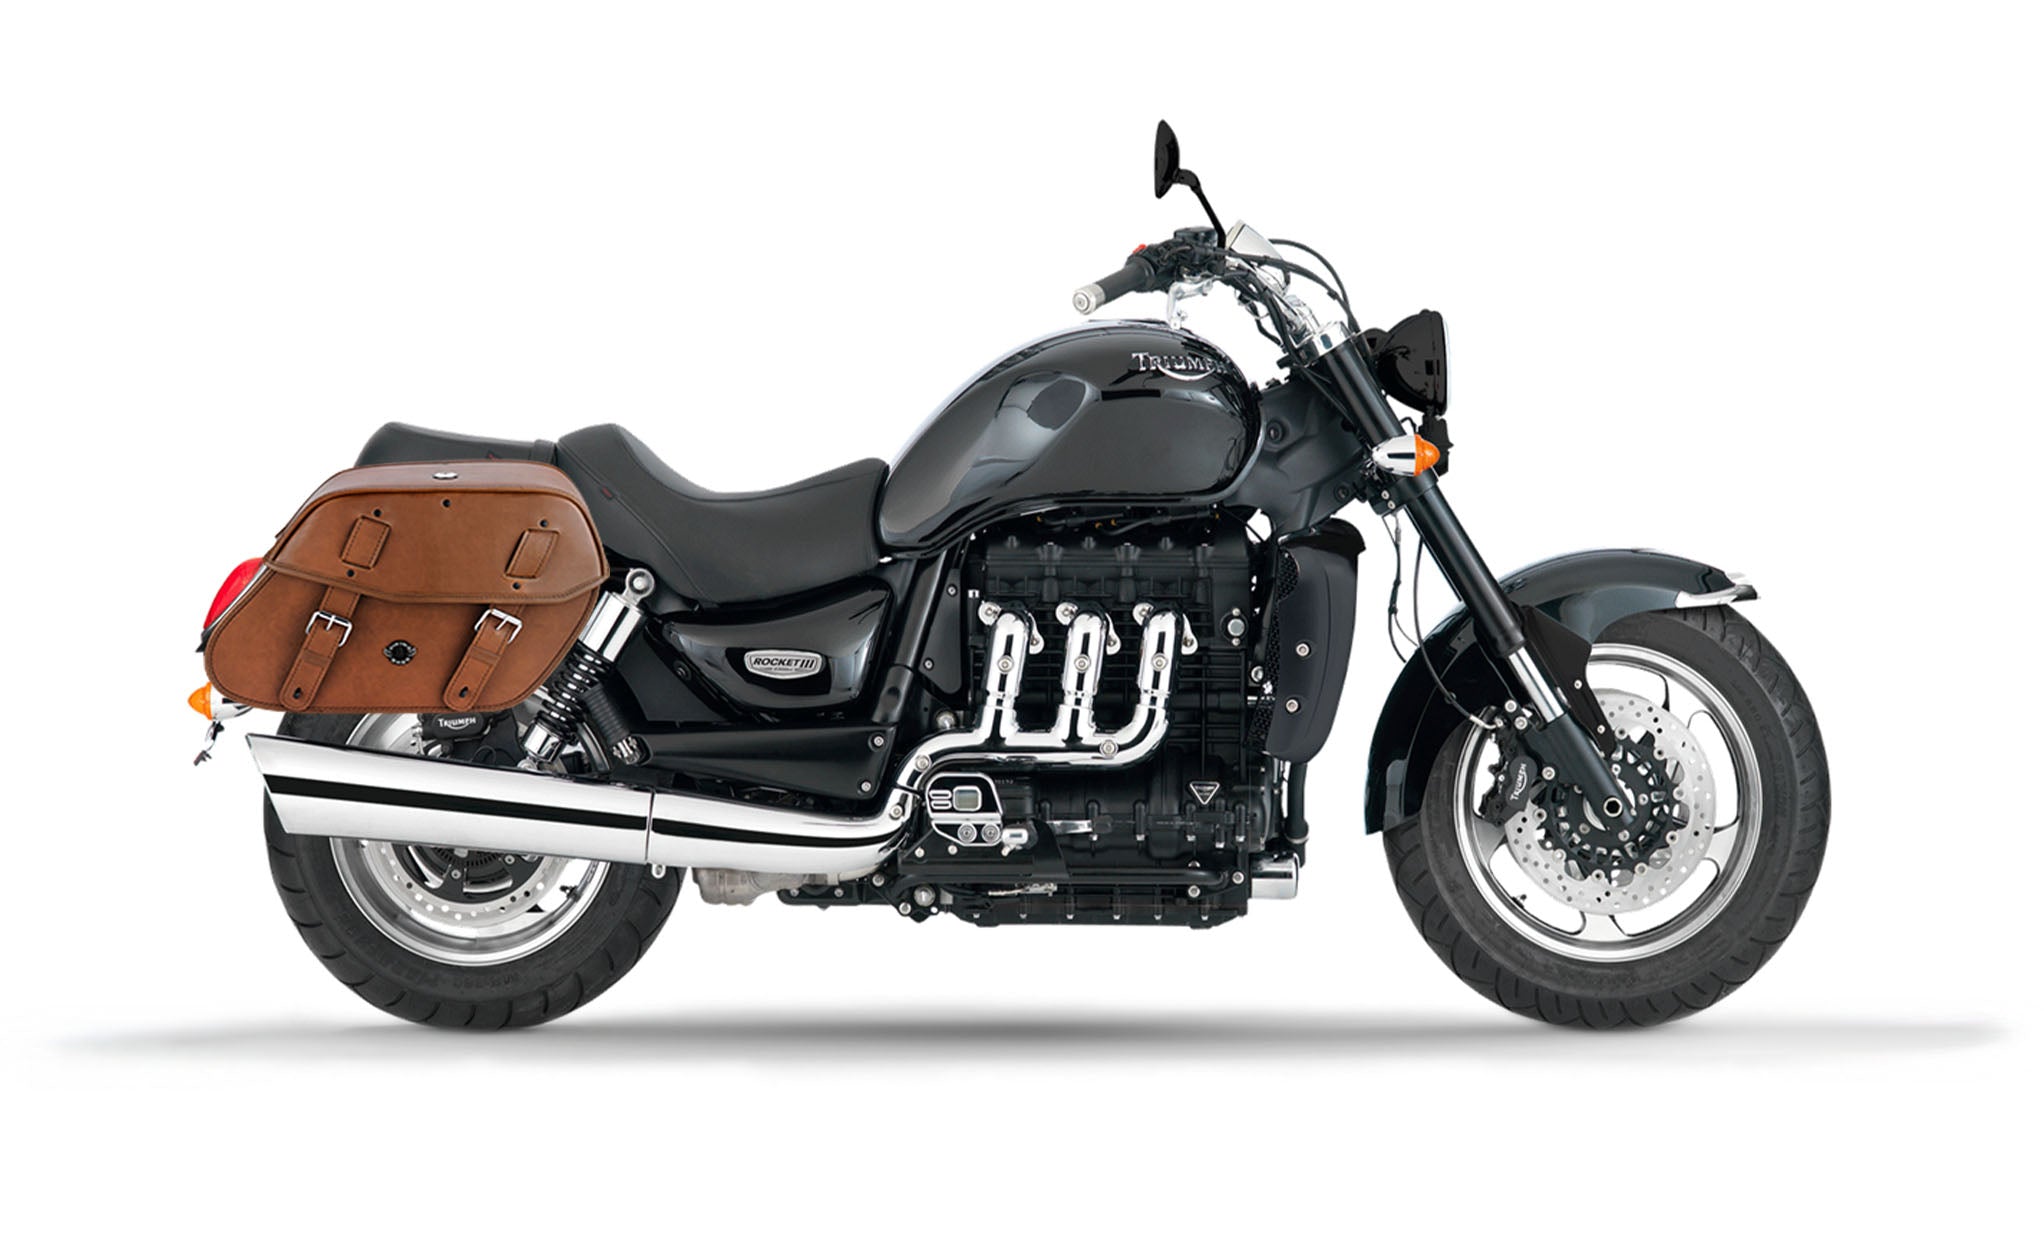 Viking Odin Brown Large Triumph Rocket Iii Roadster Leather Motorcycle Saddlebags on Bike Photo @expand